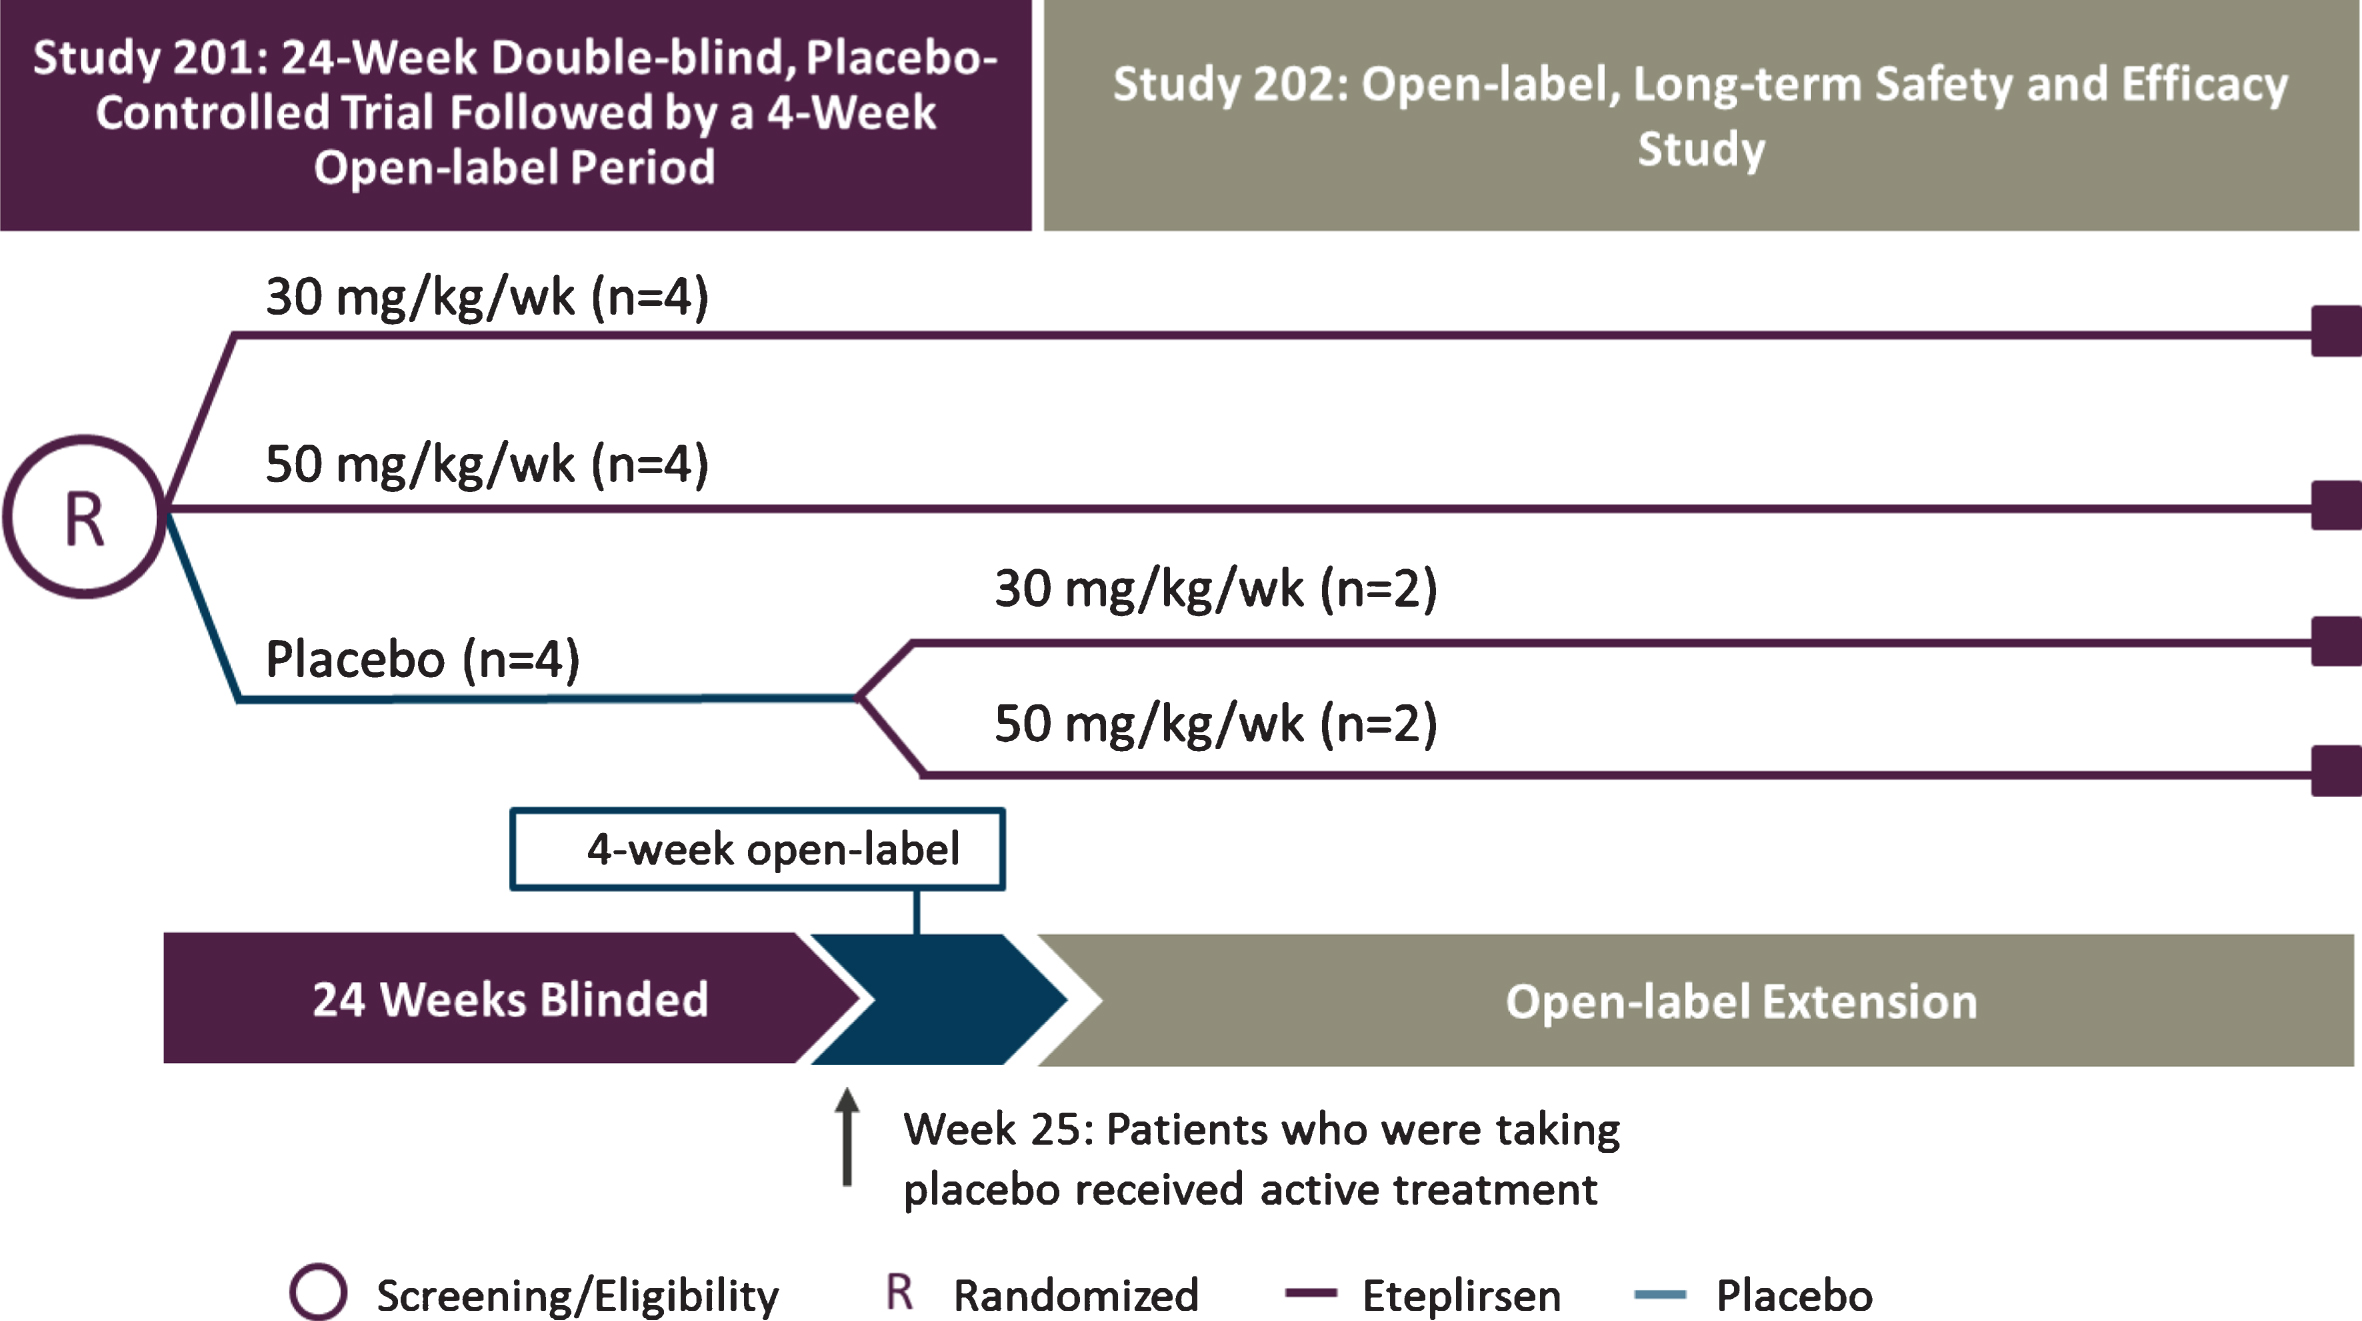 Study design for eteplirsen studies 201/202. Twelve patients with DMD were randomly assigned to 1 of 3 cohorts receiving weekly infusions in a 24-week, double-blind, placebo-controlled study: eteplirsen 30 mg/kg or 50 mg/kg (purple lines), or placebo (blue line). At week 25, eteplirsen-treated patients continued the same weekly dose as open-label, while placebo patients were randomized to open-label treatment with eteplirsen 30 mg/kg or 50 mg/kg weekly IV (study 202). Pulmonary function tests were assessed in compliance with American Thoracic Society guidelines at least every 24 weeks. The 5-year data represent time on drug, beginning at week 0 for patients in treatment arms and at week 24 for those in the placebo arm of study 201. DMD, Duchenne muscular dystrophy; IV, intravenous.